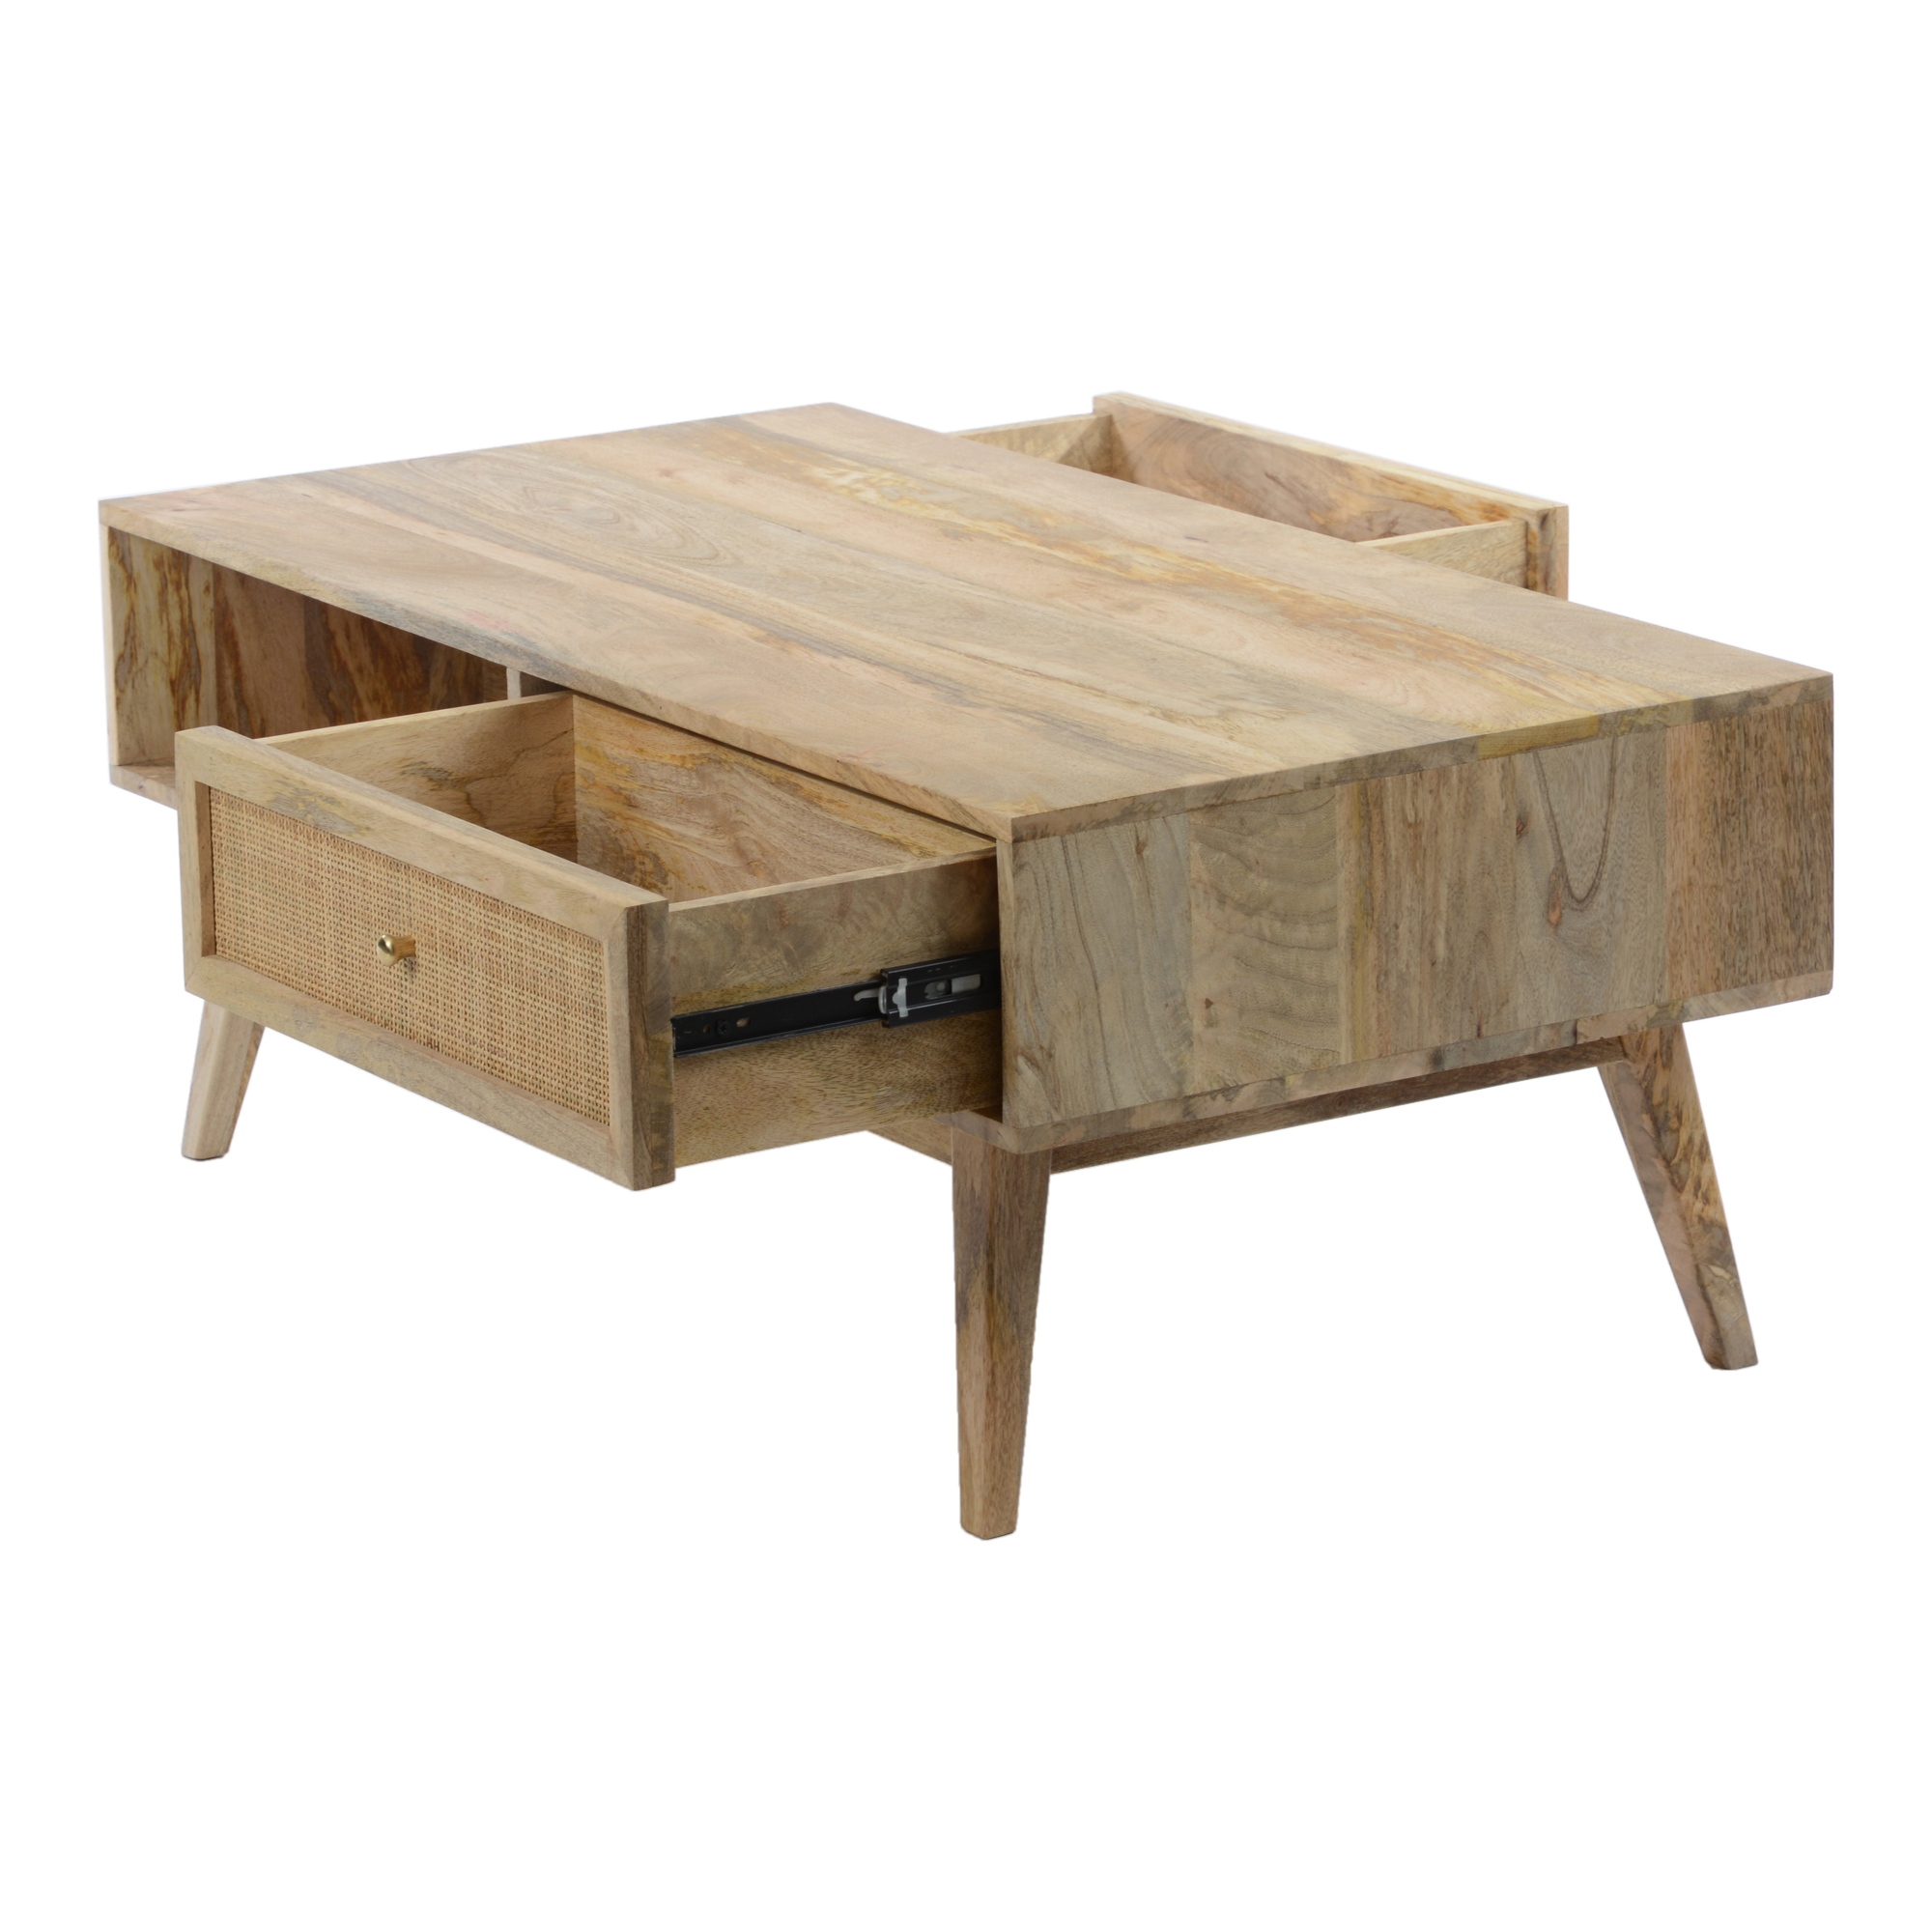 REED COFFEE TABLE - Image 3